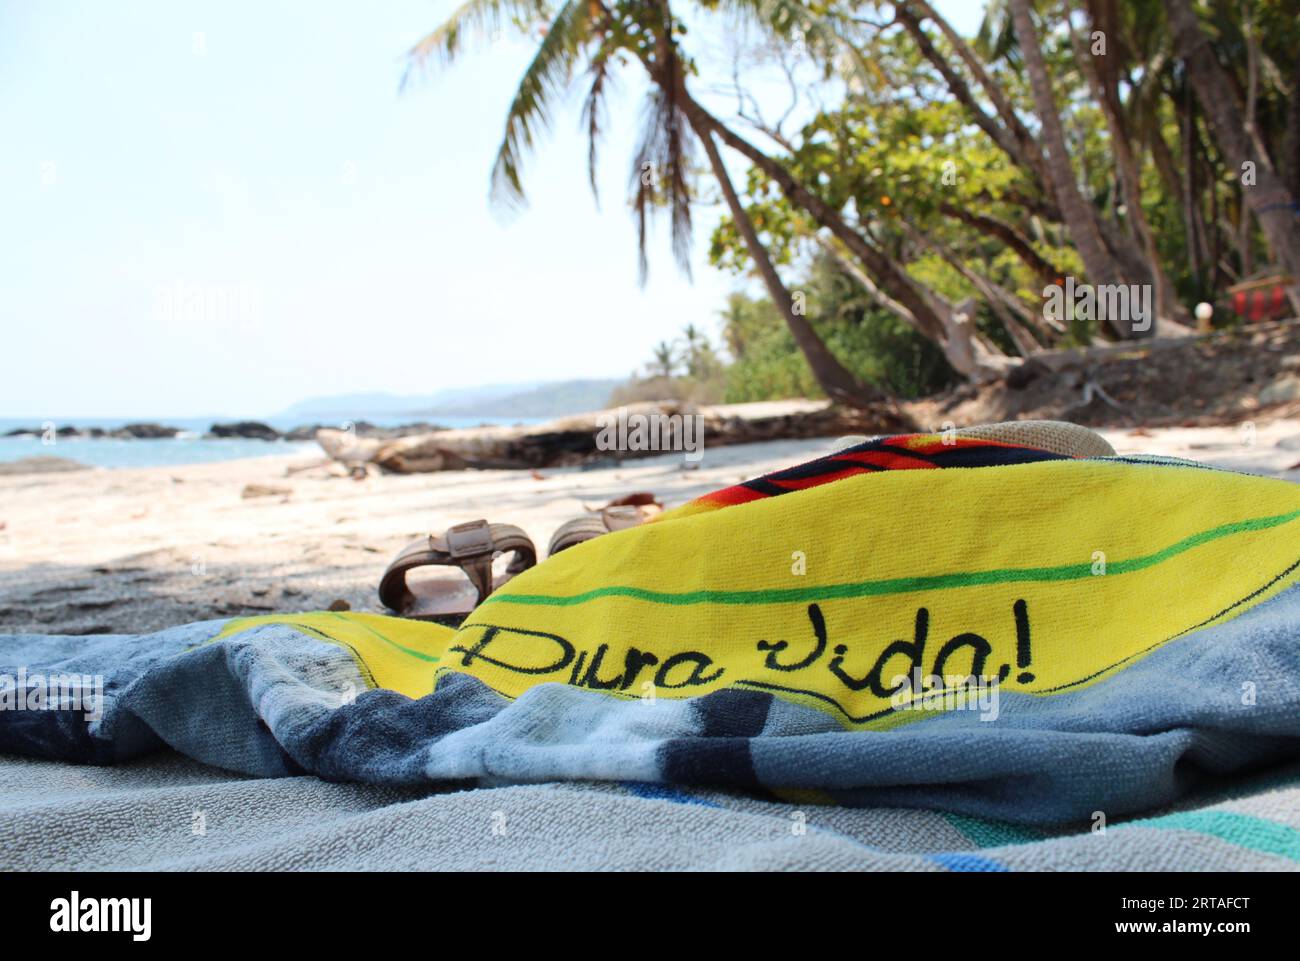 Enjoying life at a paradise beach in Costa Rica, 'pura vida!' on the beach towel means “simple life” or “pure life,” but in Costa Rica it is more than Stock Photo